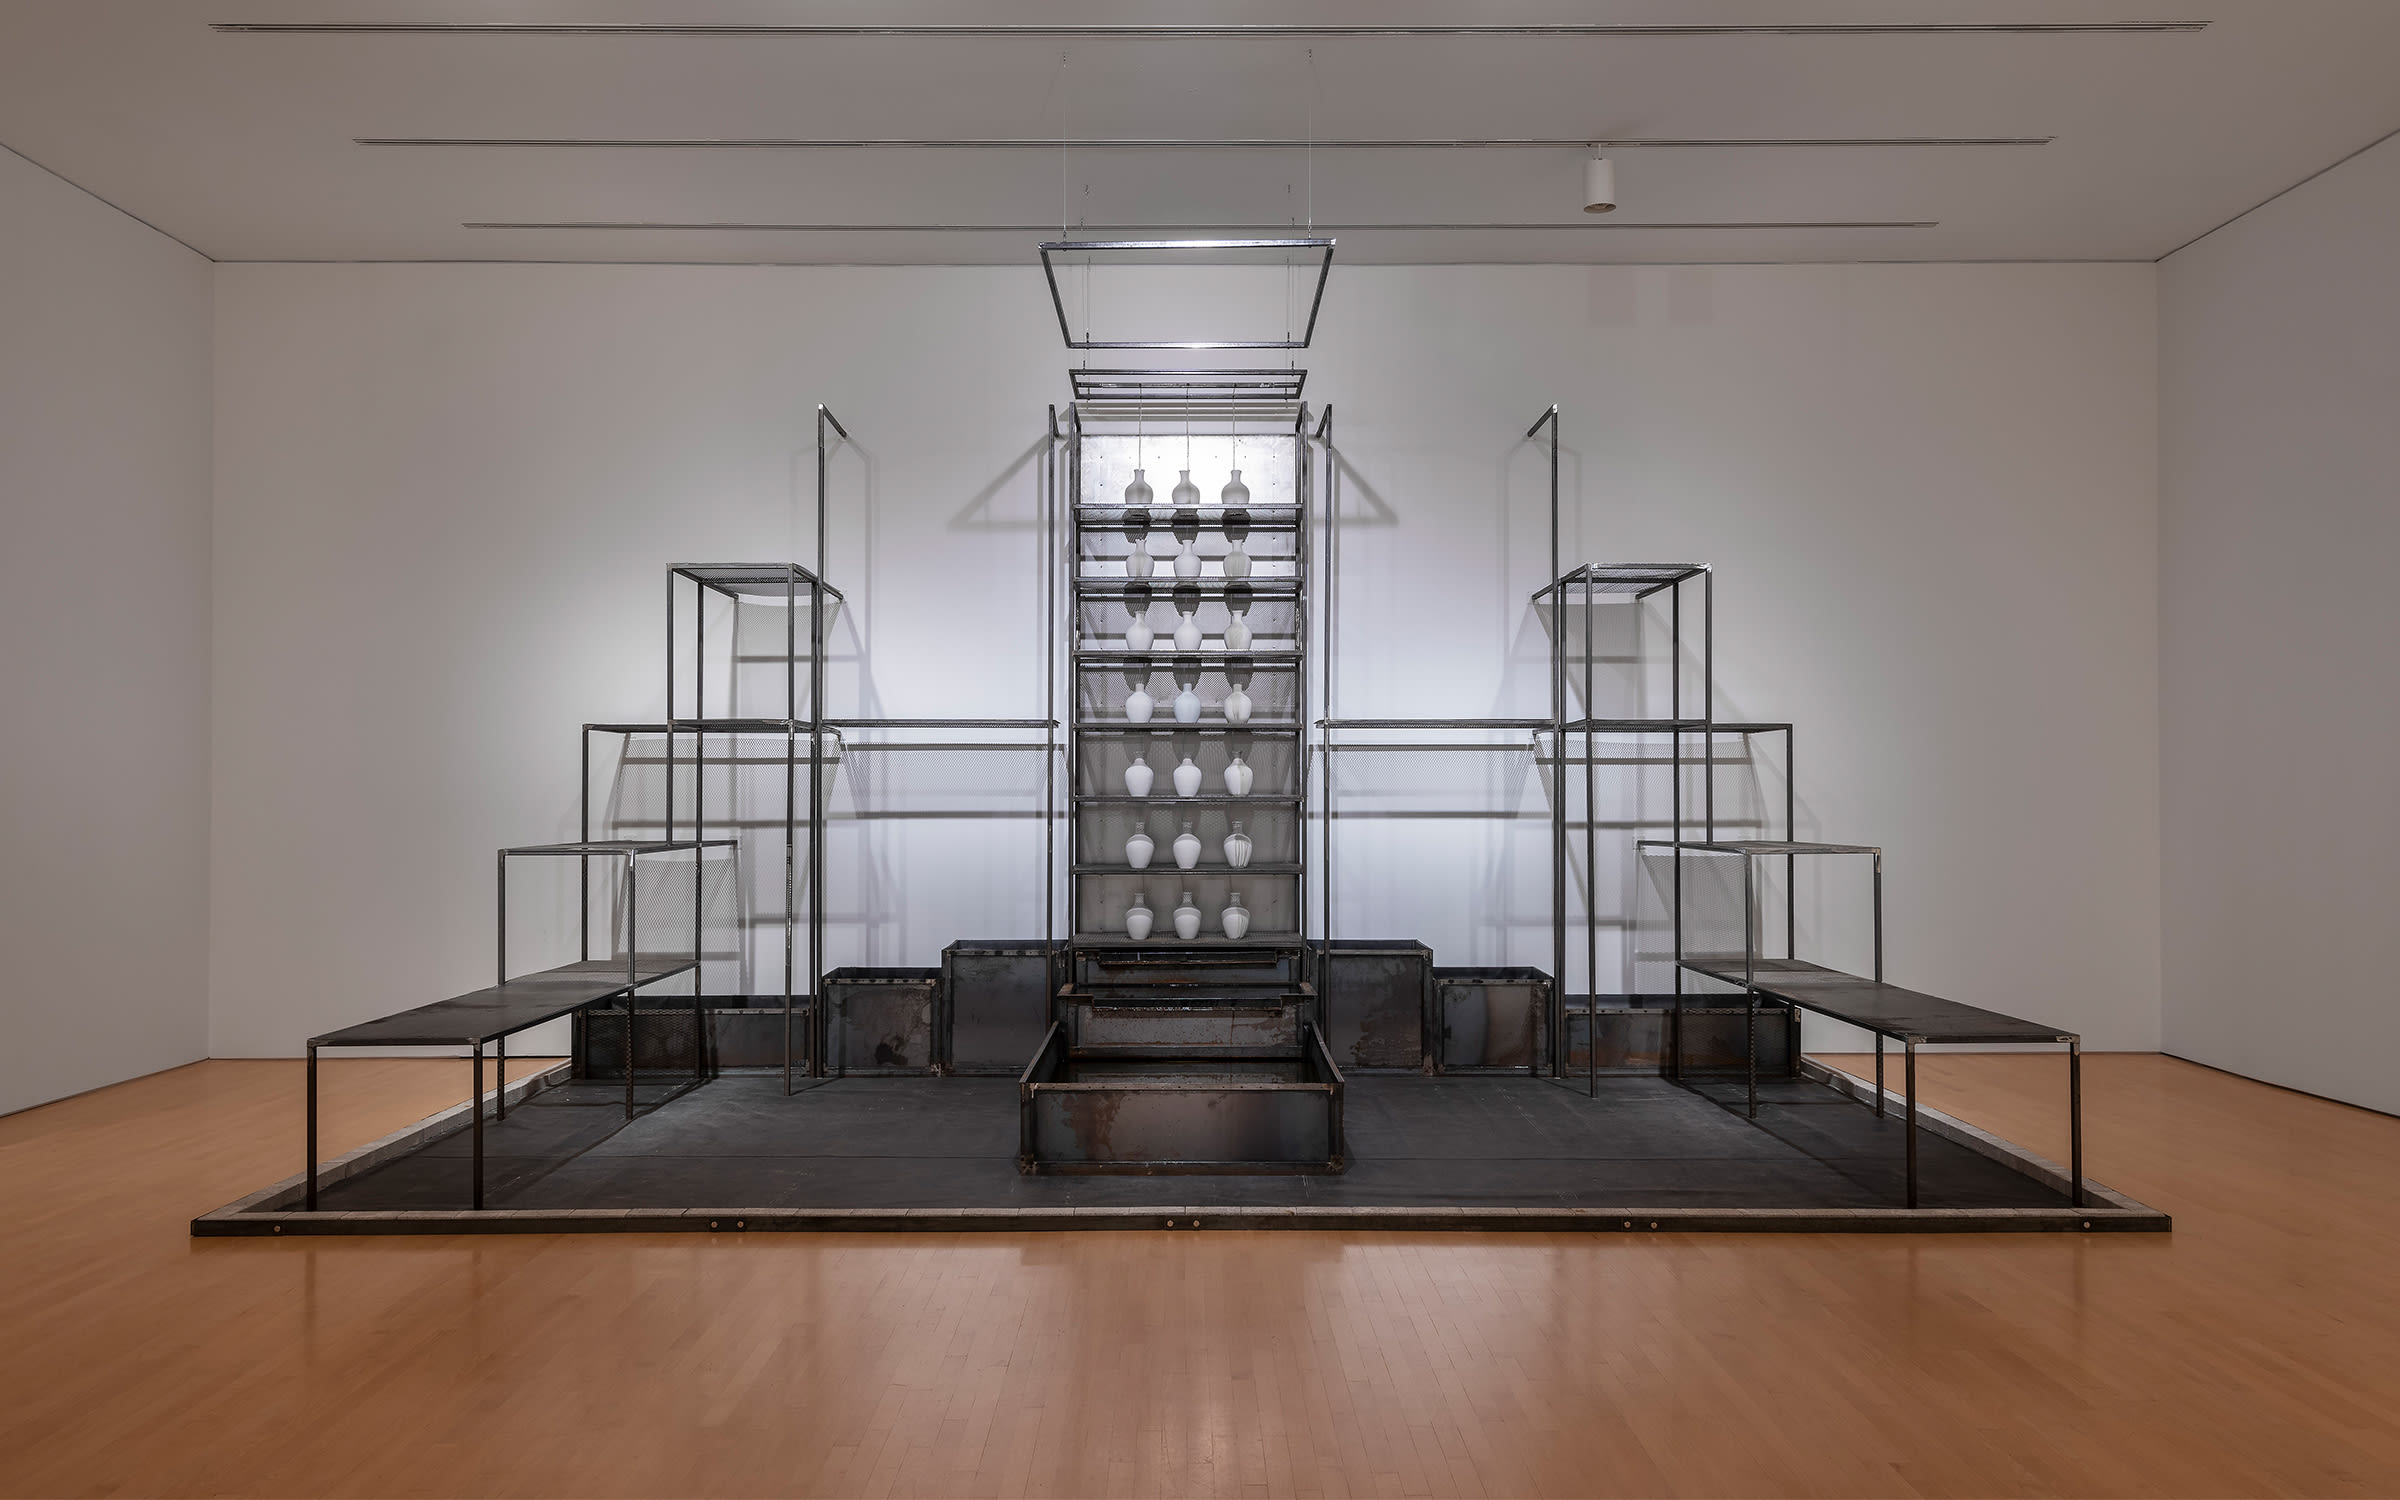 Azza El Siddique, Measure of one, 2022. Installation view  from the Sobey Award Exhibition, The National Gallery of Canada, Ottawa. Photography by Toni Hafkenscheid. Curtesy of the artist and Bradley Ertaskiran.